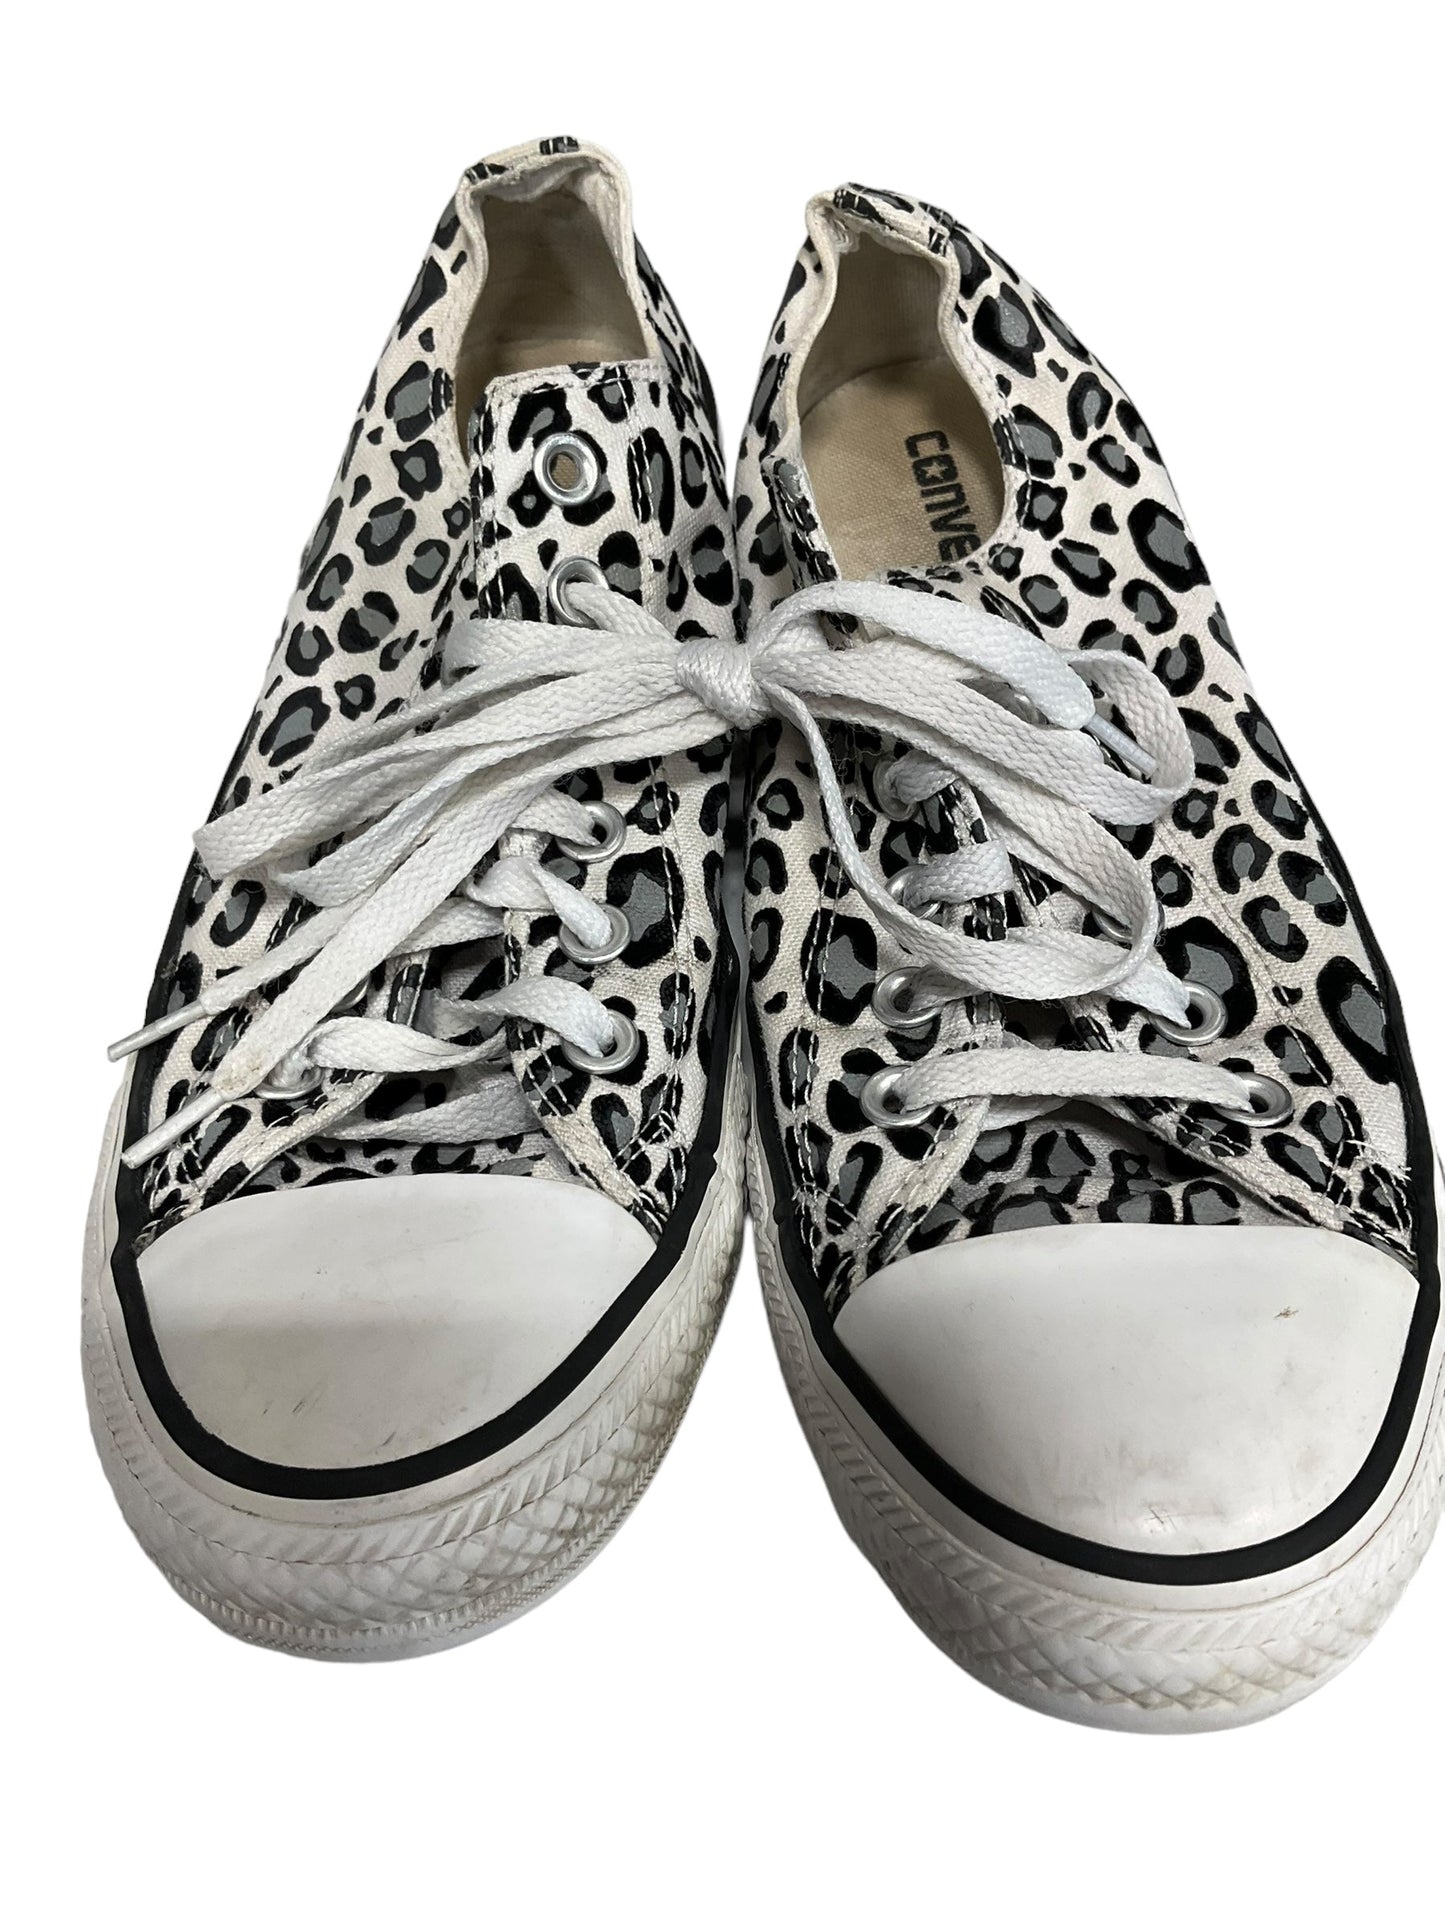 Animal Print Shoes Athletic Converse, Size 9